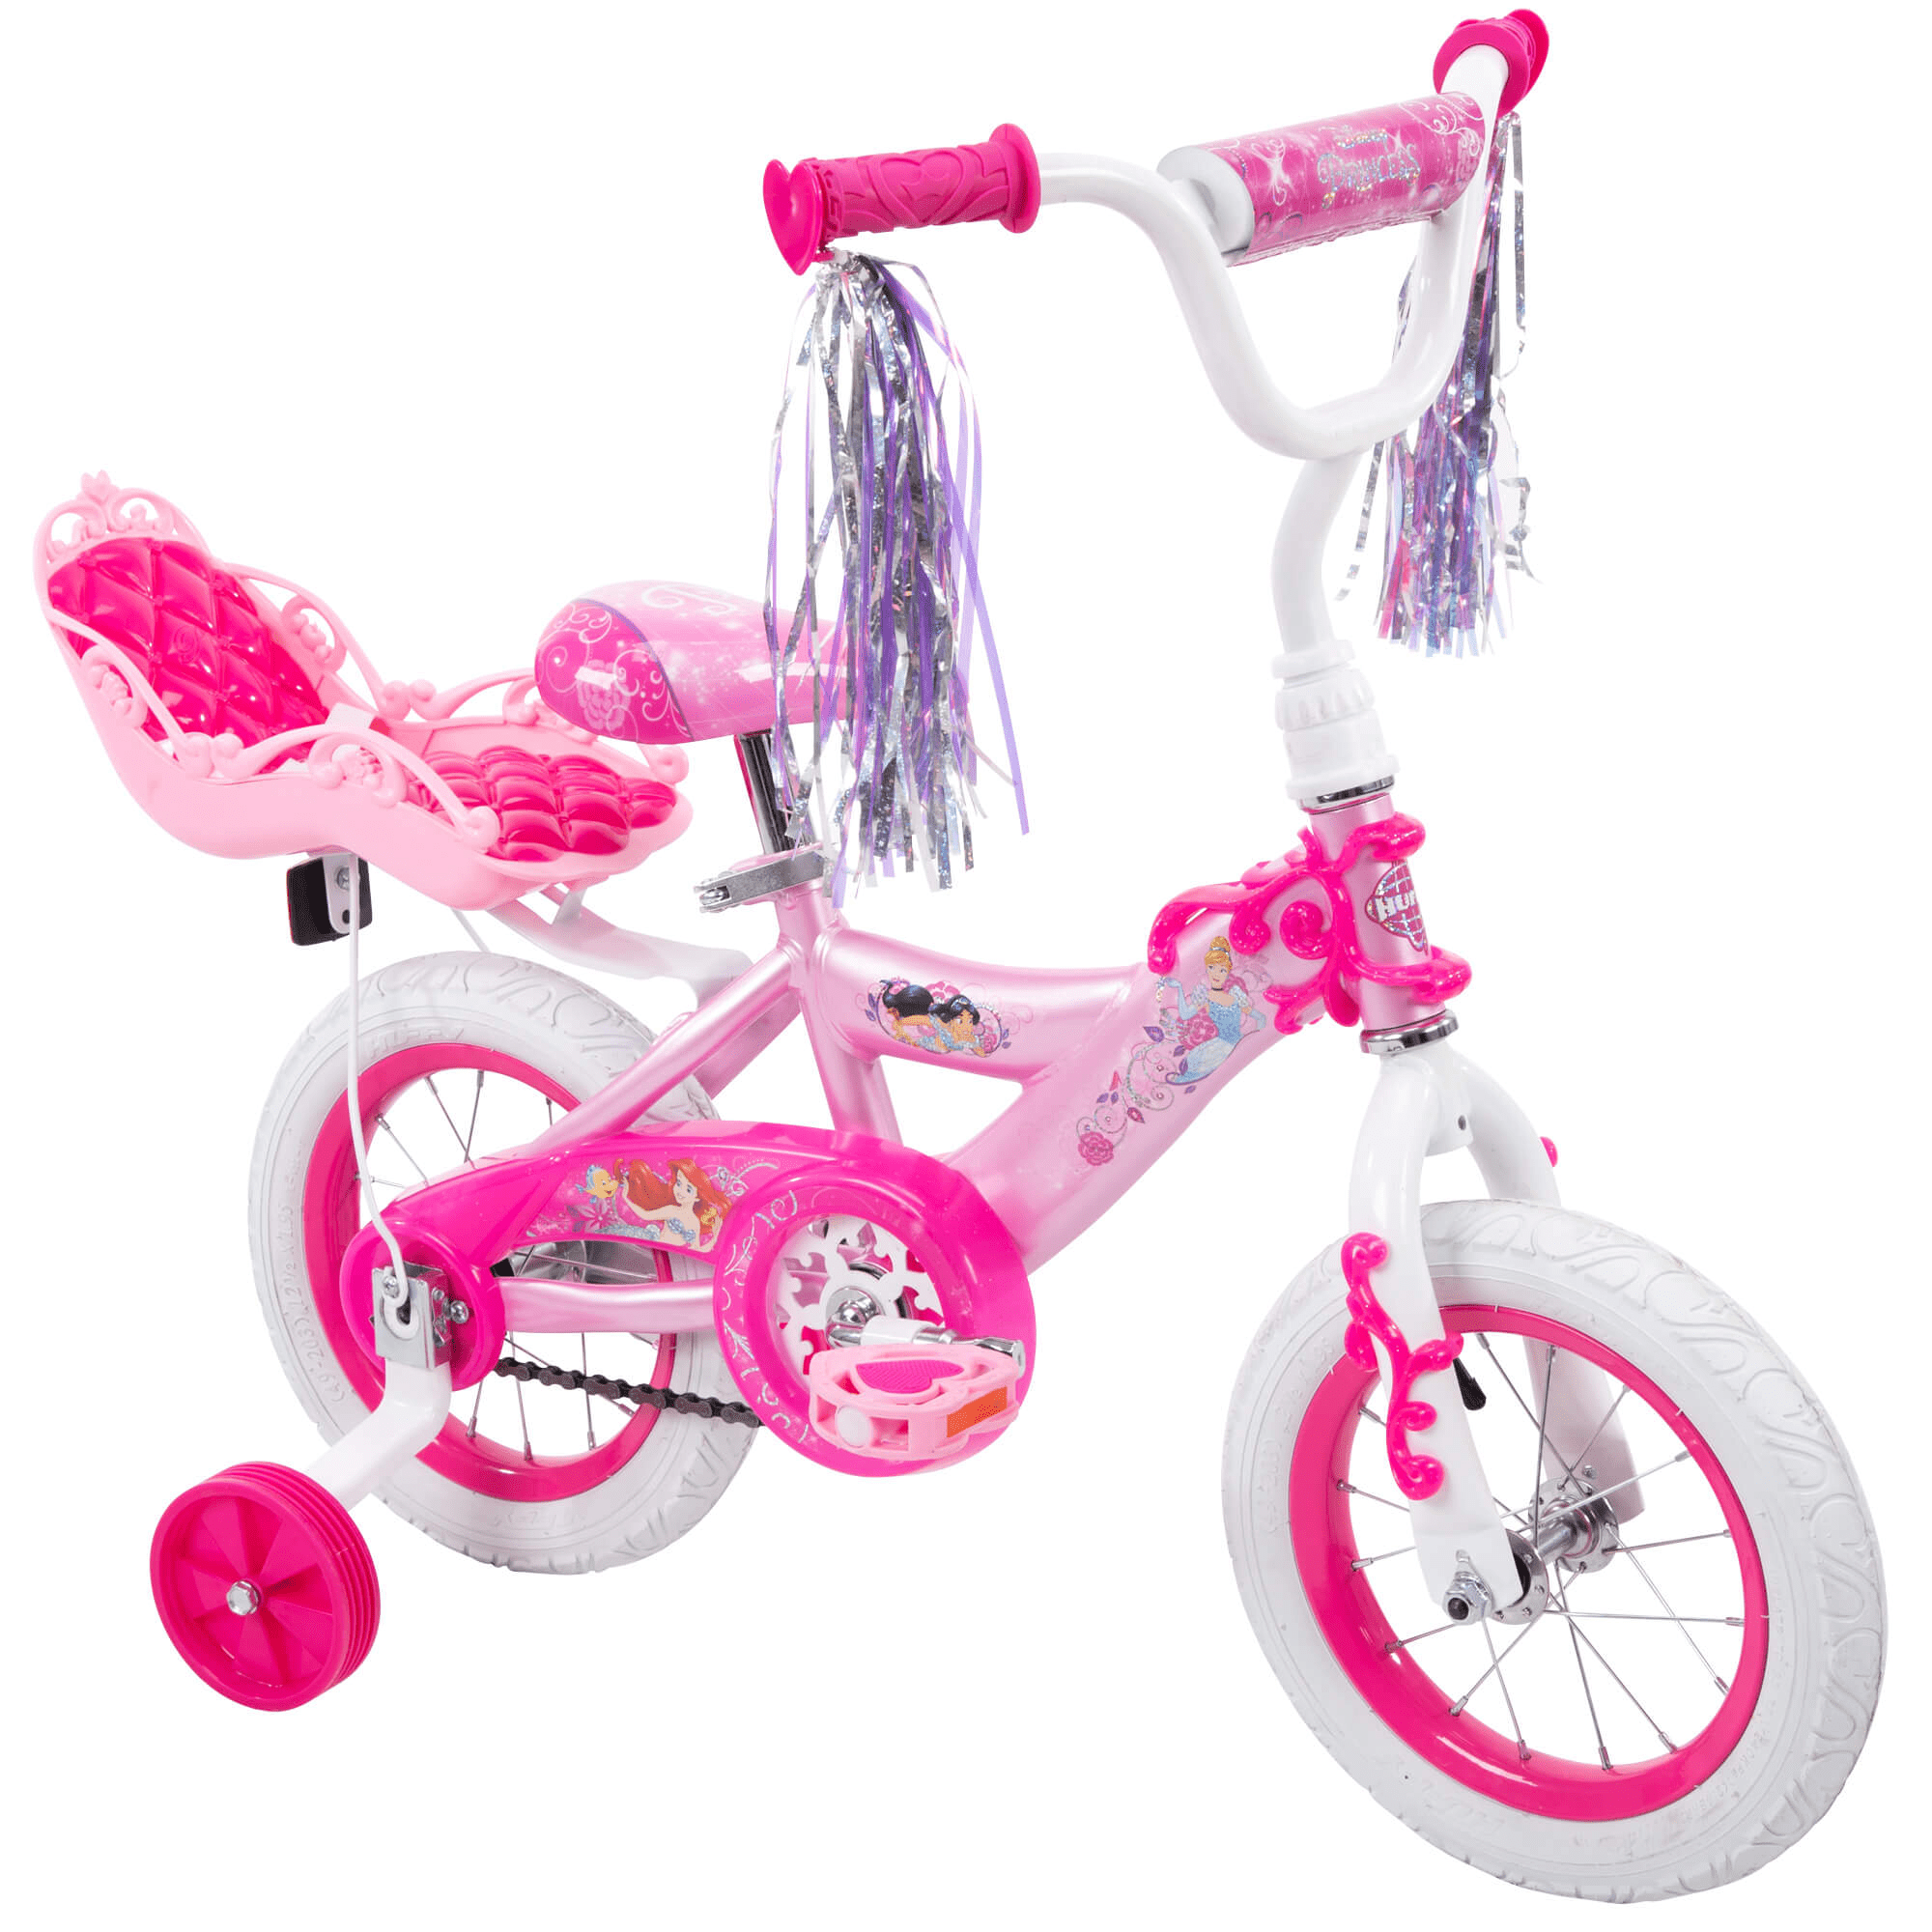 Details about   NEW Disney Princess Girls' 12" Bike with Doll Carrier by Huffy 